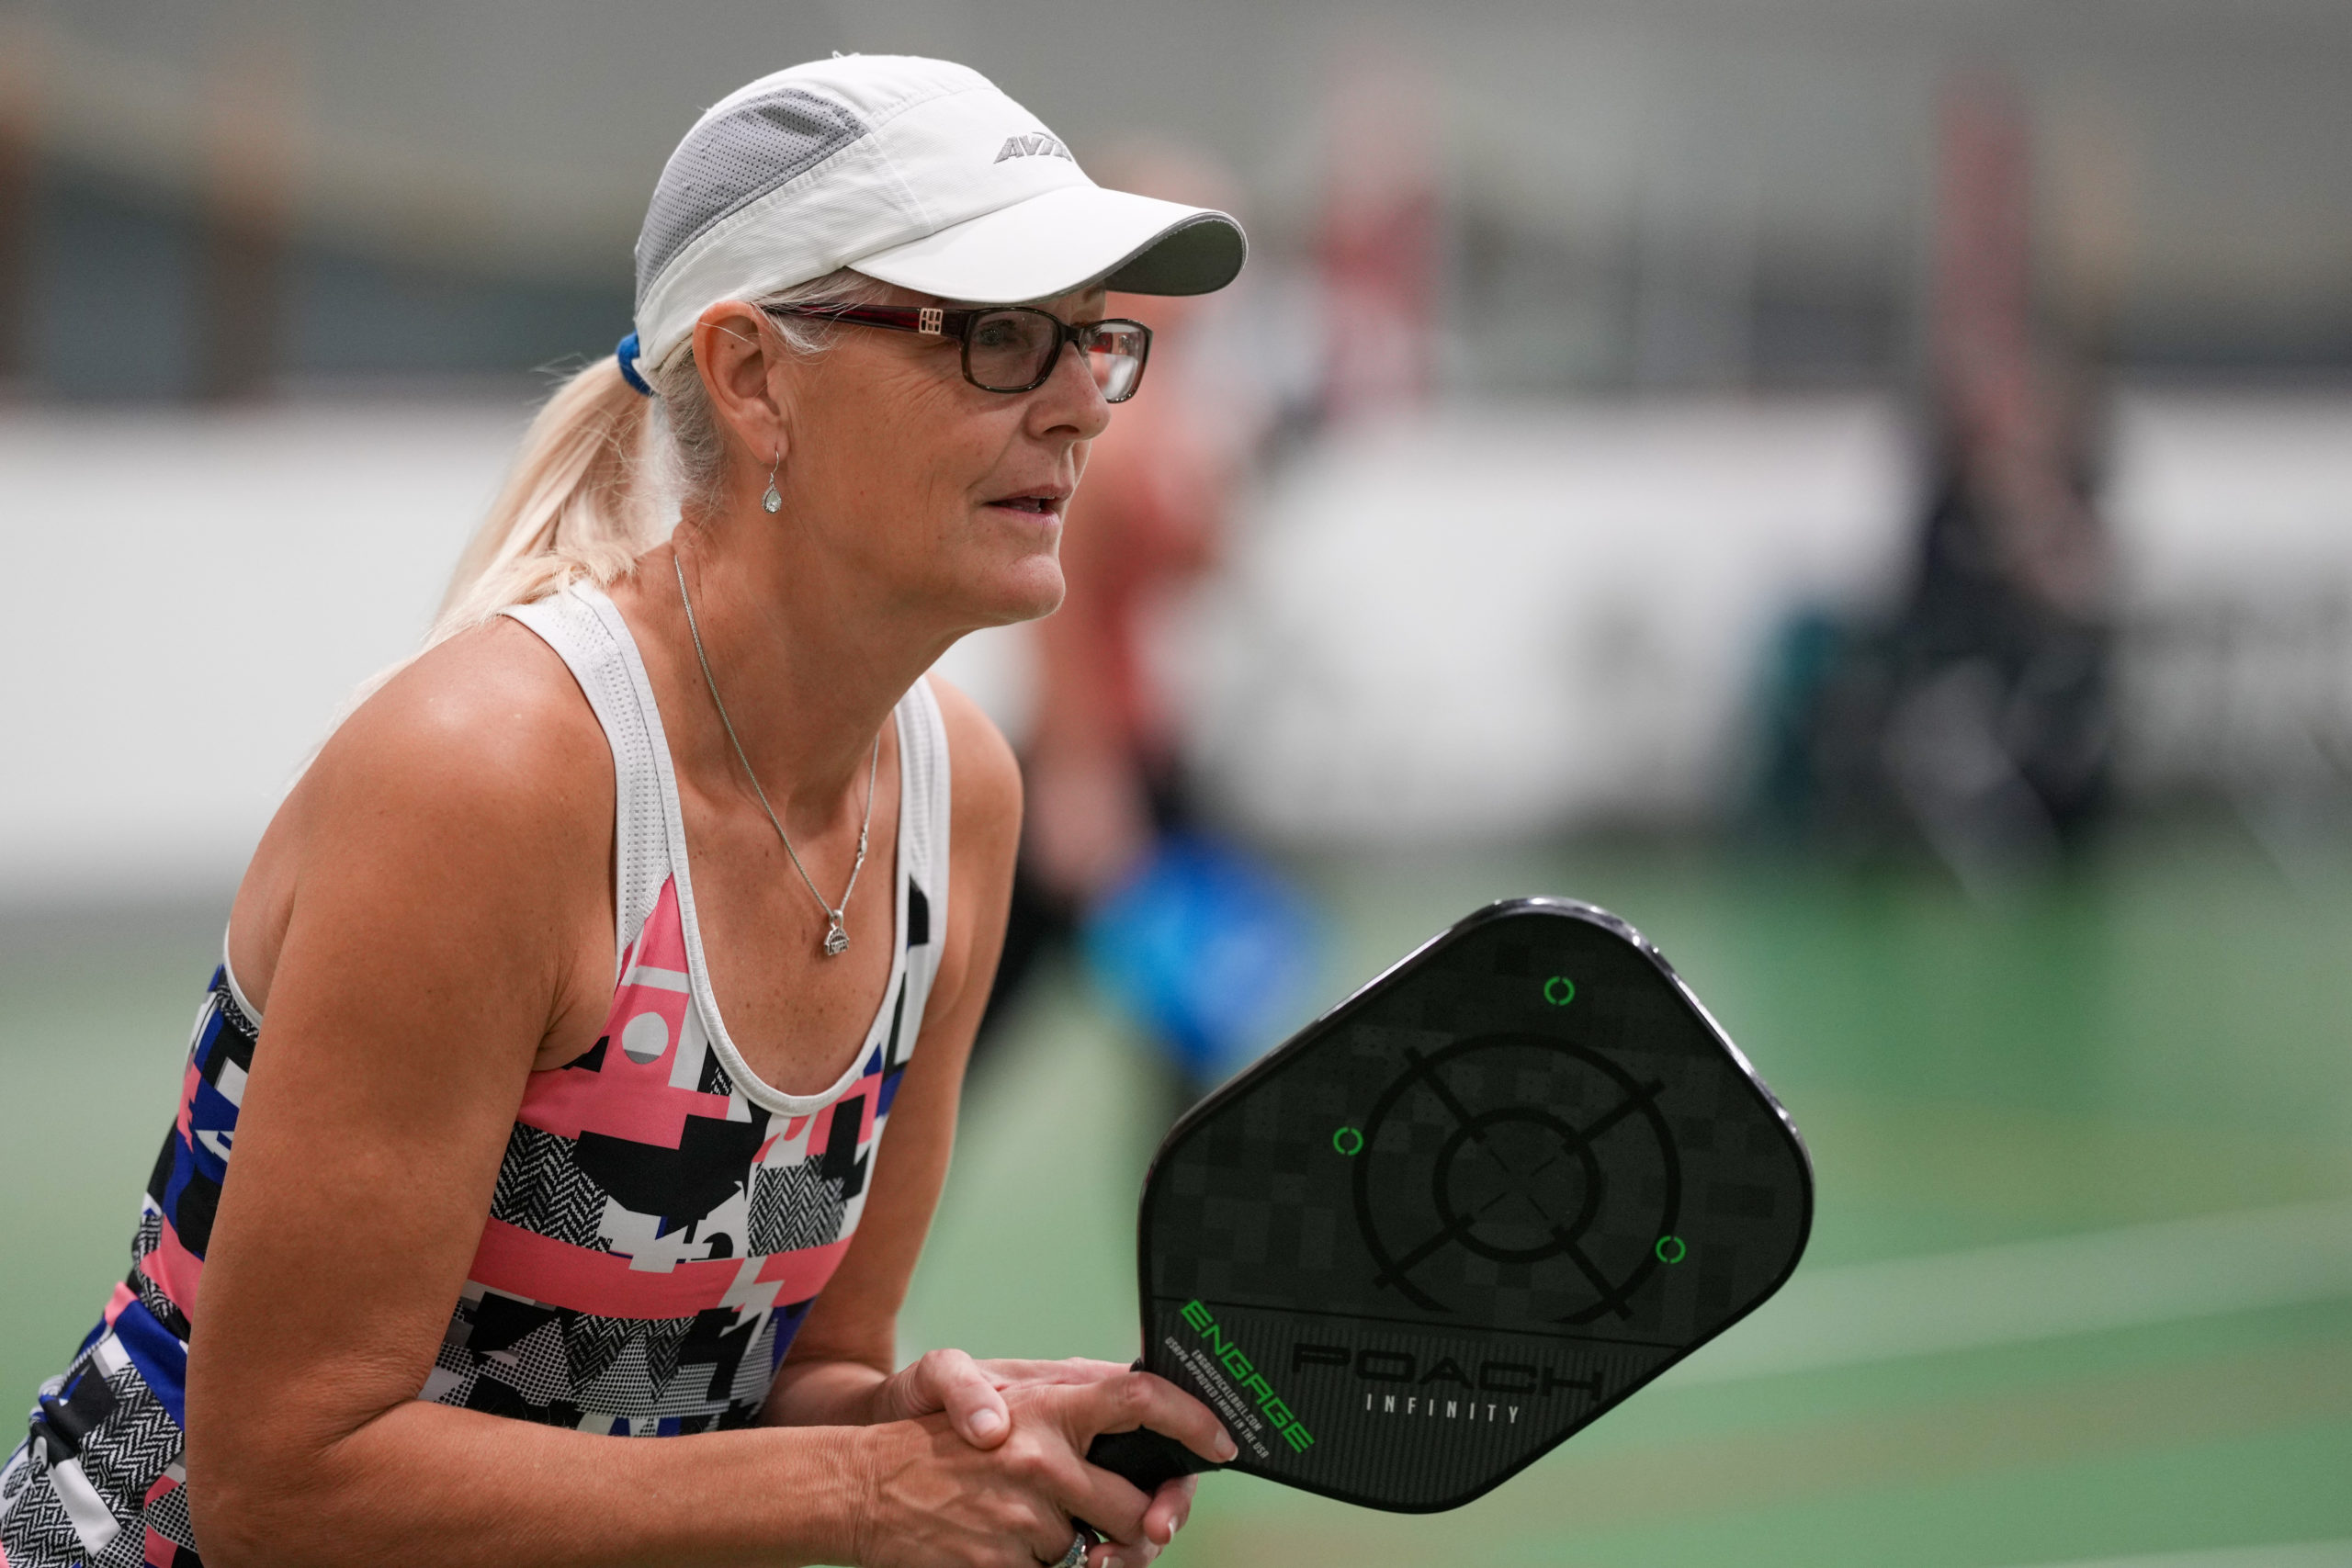 The inaugural Heart of the Hamptons SYS Pickleball Tournament on Saturday brought in players from Nassau County to Montauk and raised $5,000 for the Southampton-based charity organization.